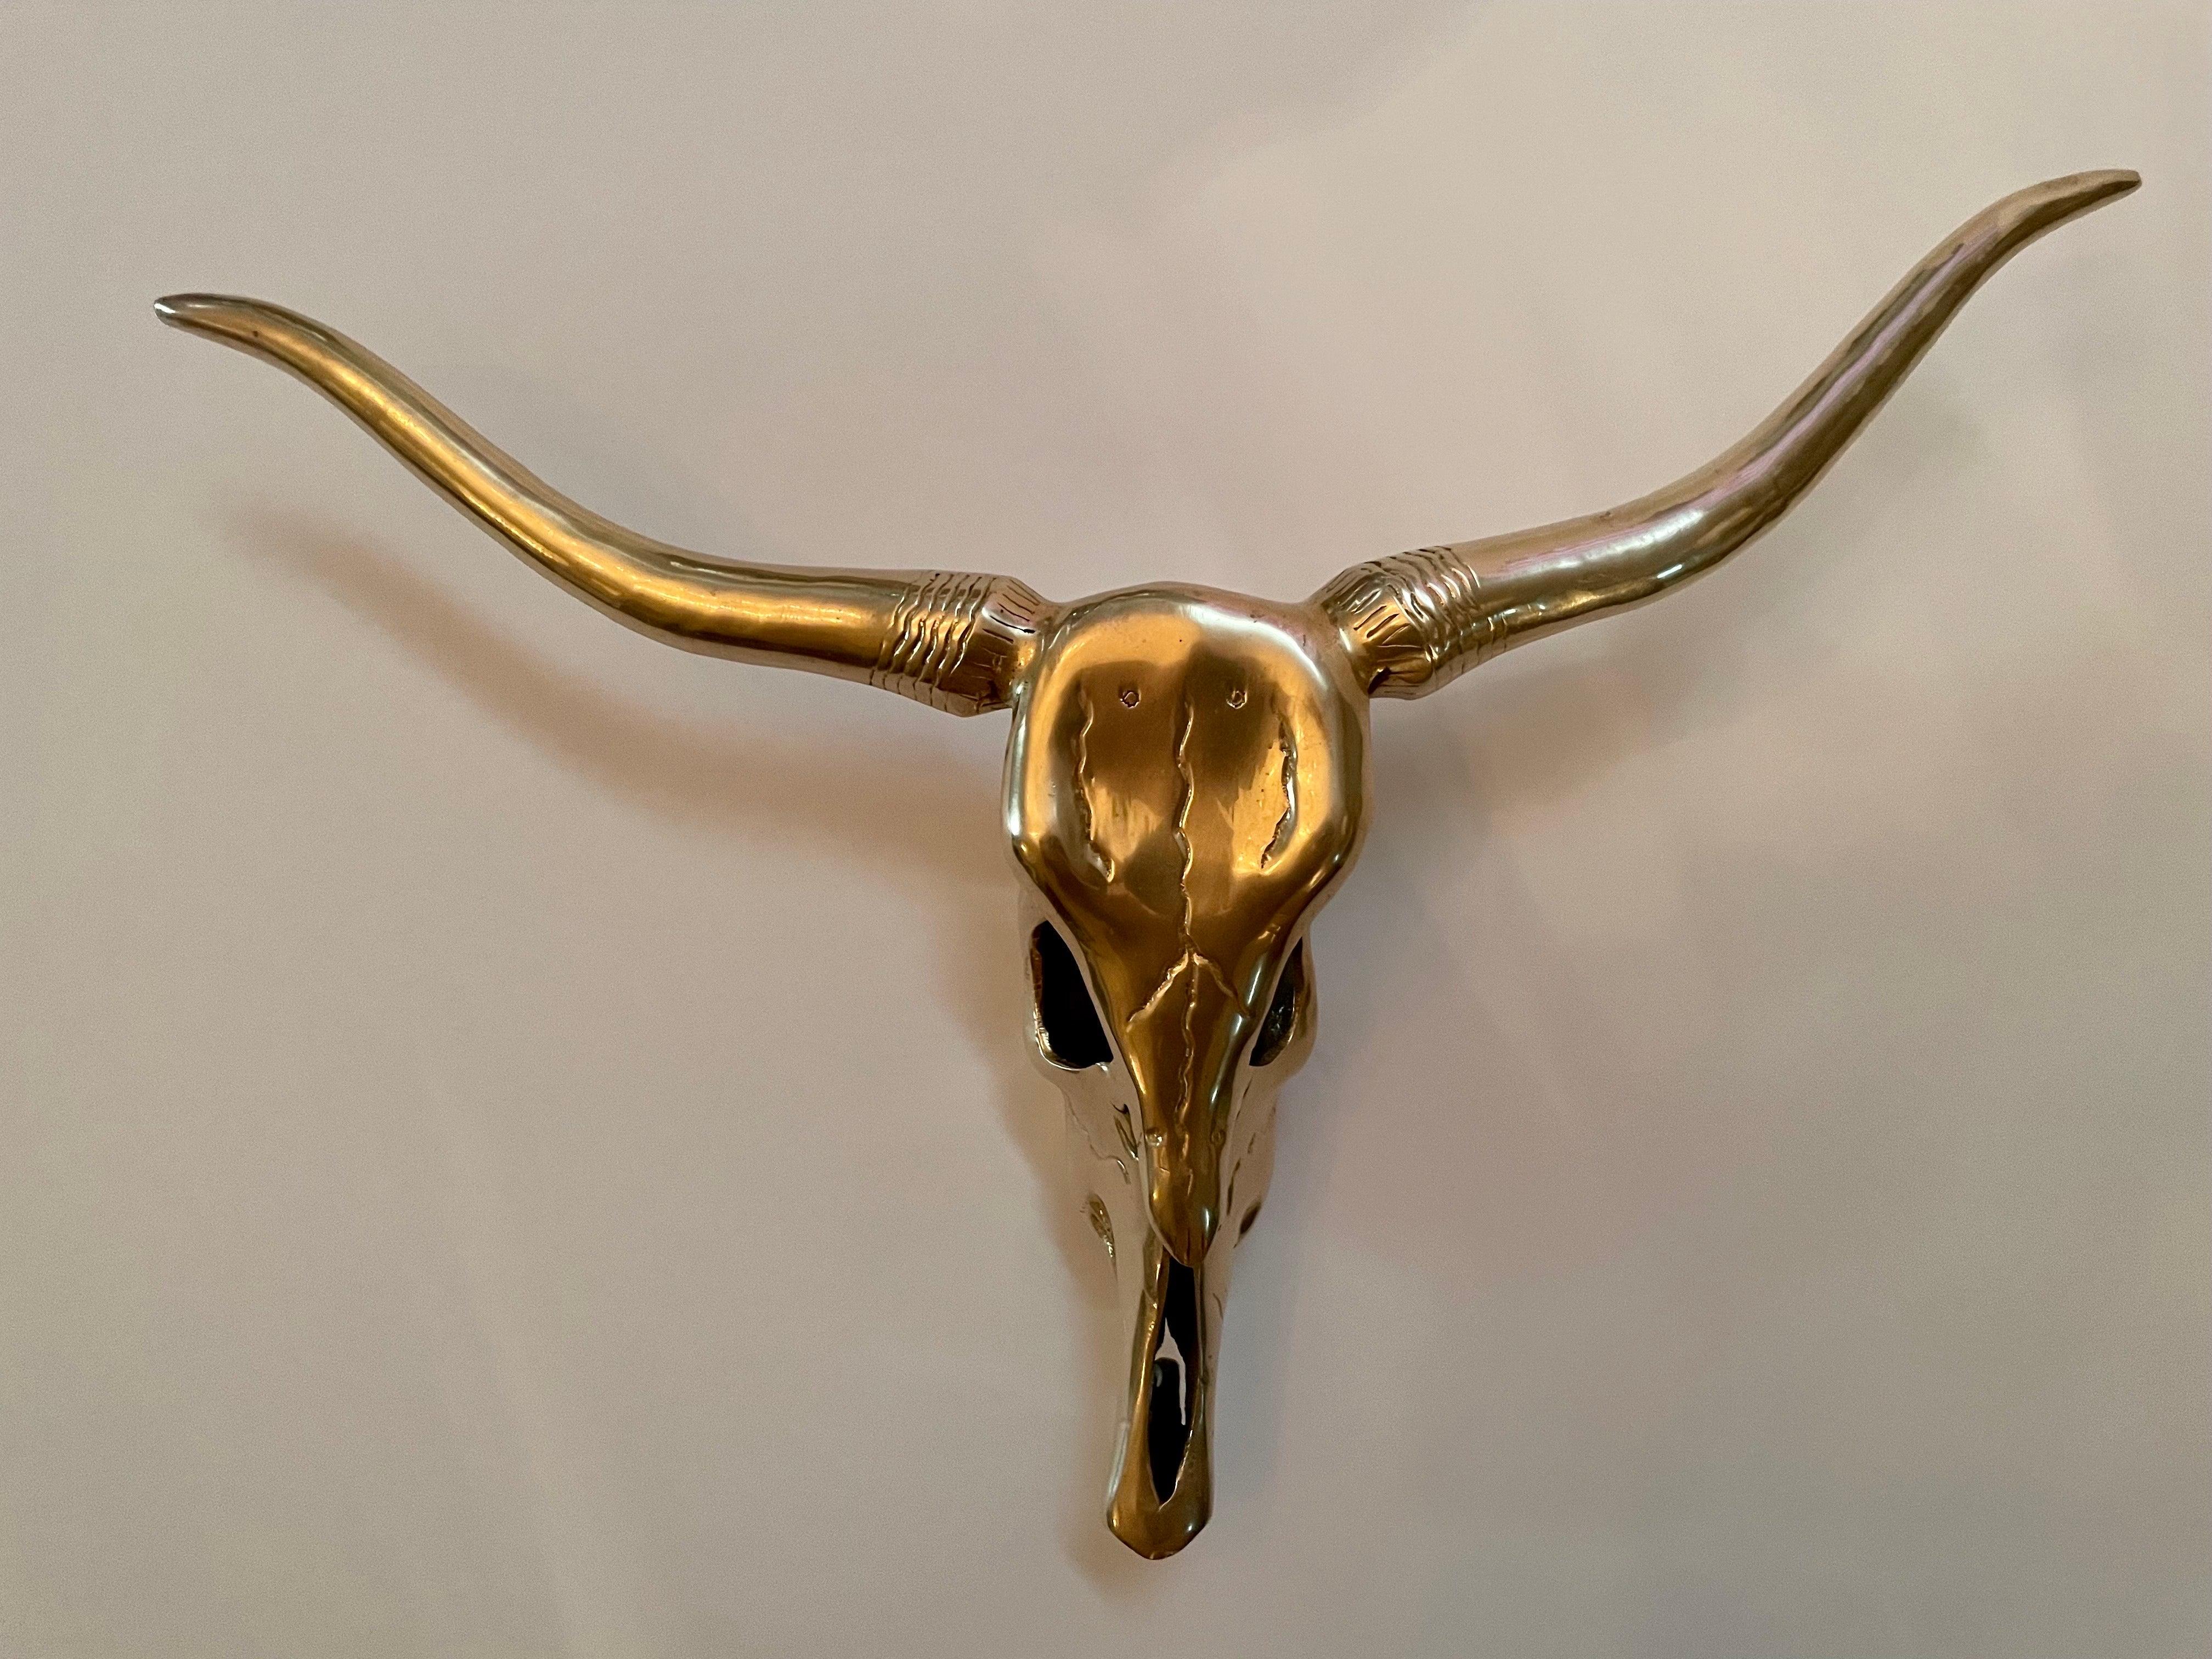 Circa mid-20th century Hollywood Regency style decorative brass longhorn skull wall sculpture in a hand polished finish. Please note of wear consistent with age. Good overall condition.